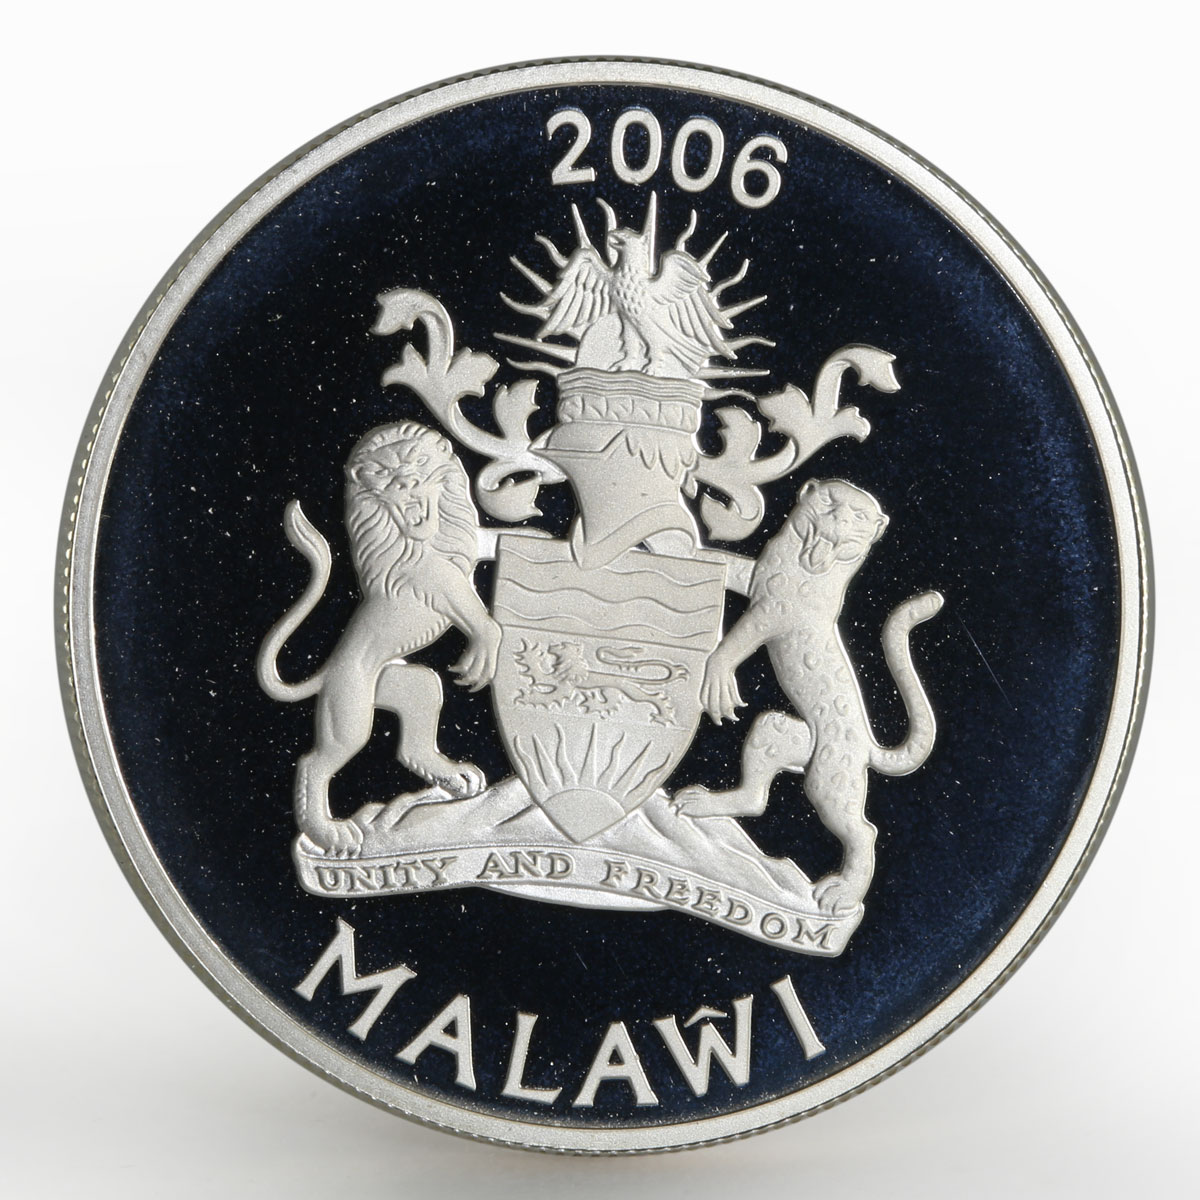 Malawi 5 kwacha Journey to Africa series Victoria Falls proof silver coin 2006